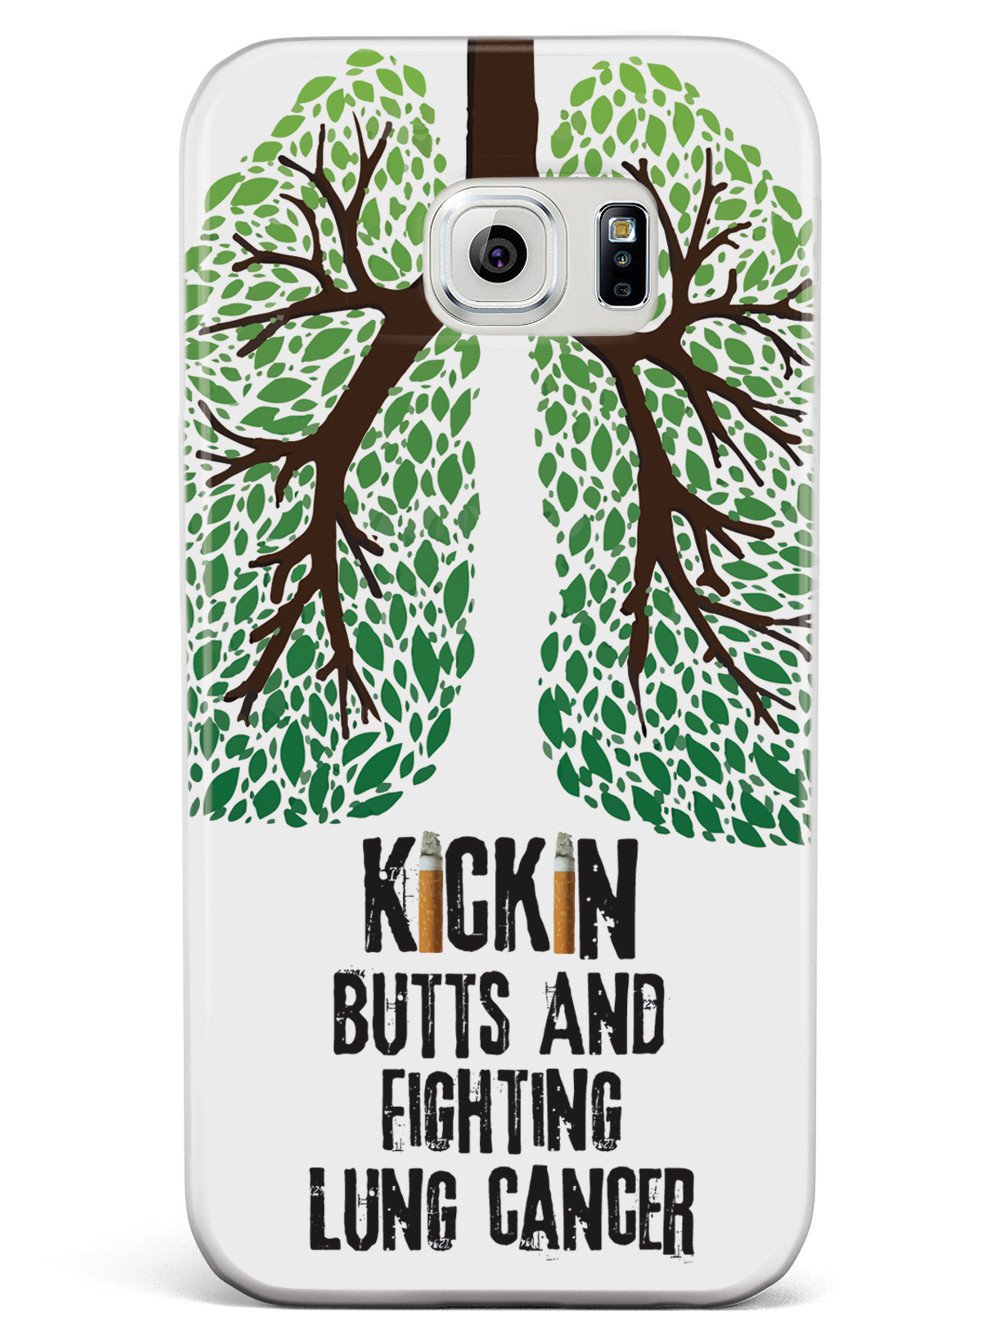 Kicking Butts & Fighting Lung Cancer - Awareness Case